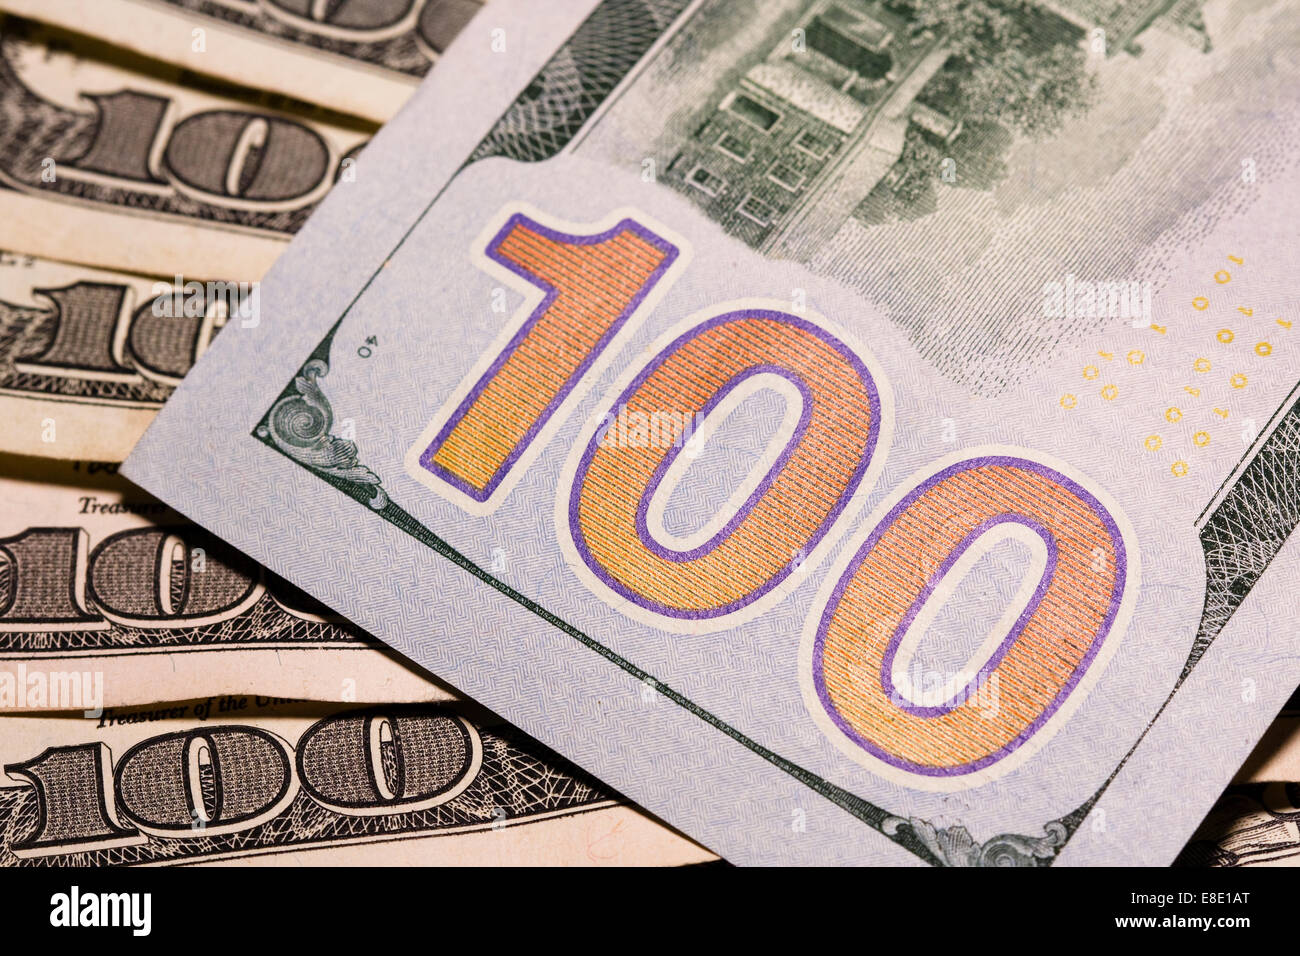 Many Hundred Dollar bills spread on a table top showing several different types of security printing techniques Stock Photo